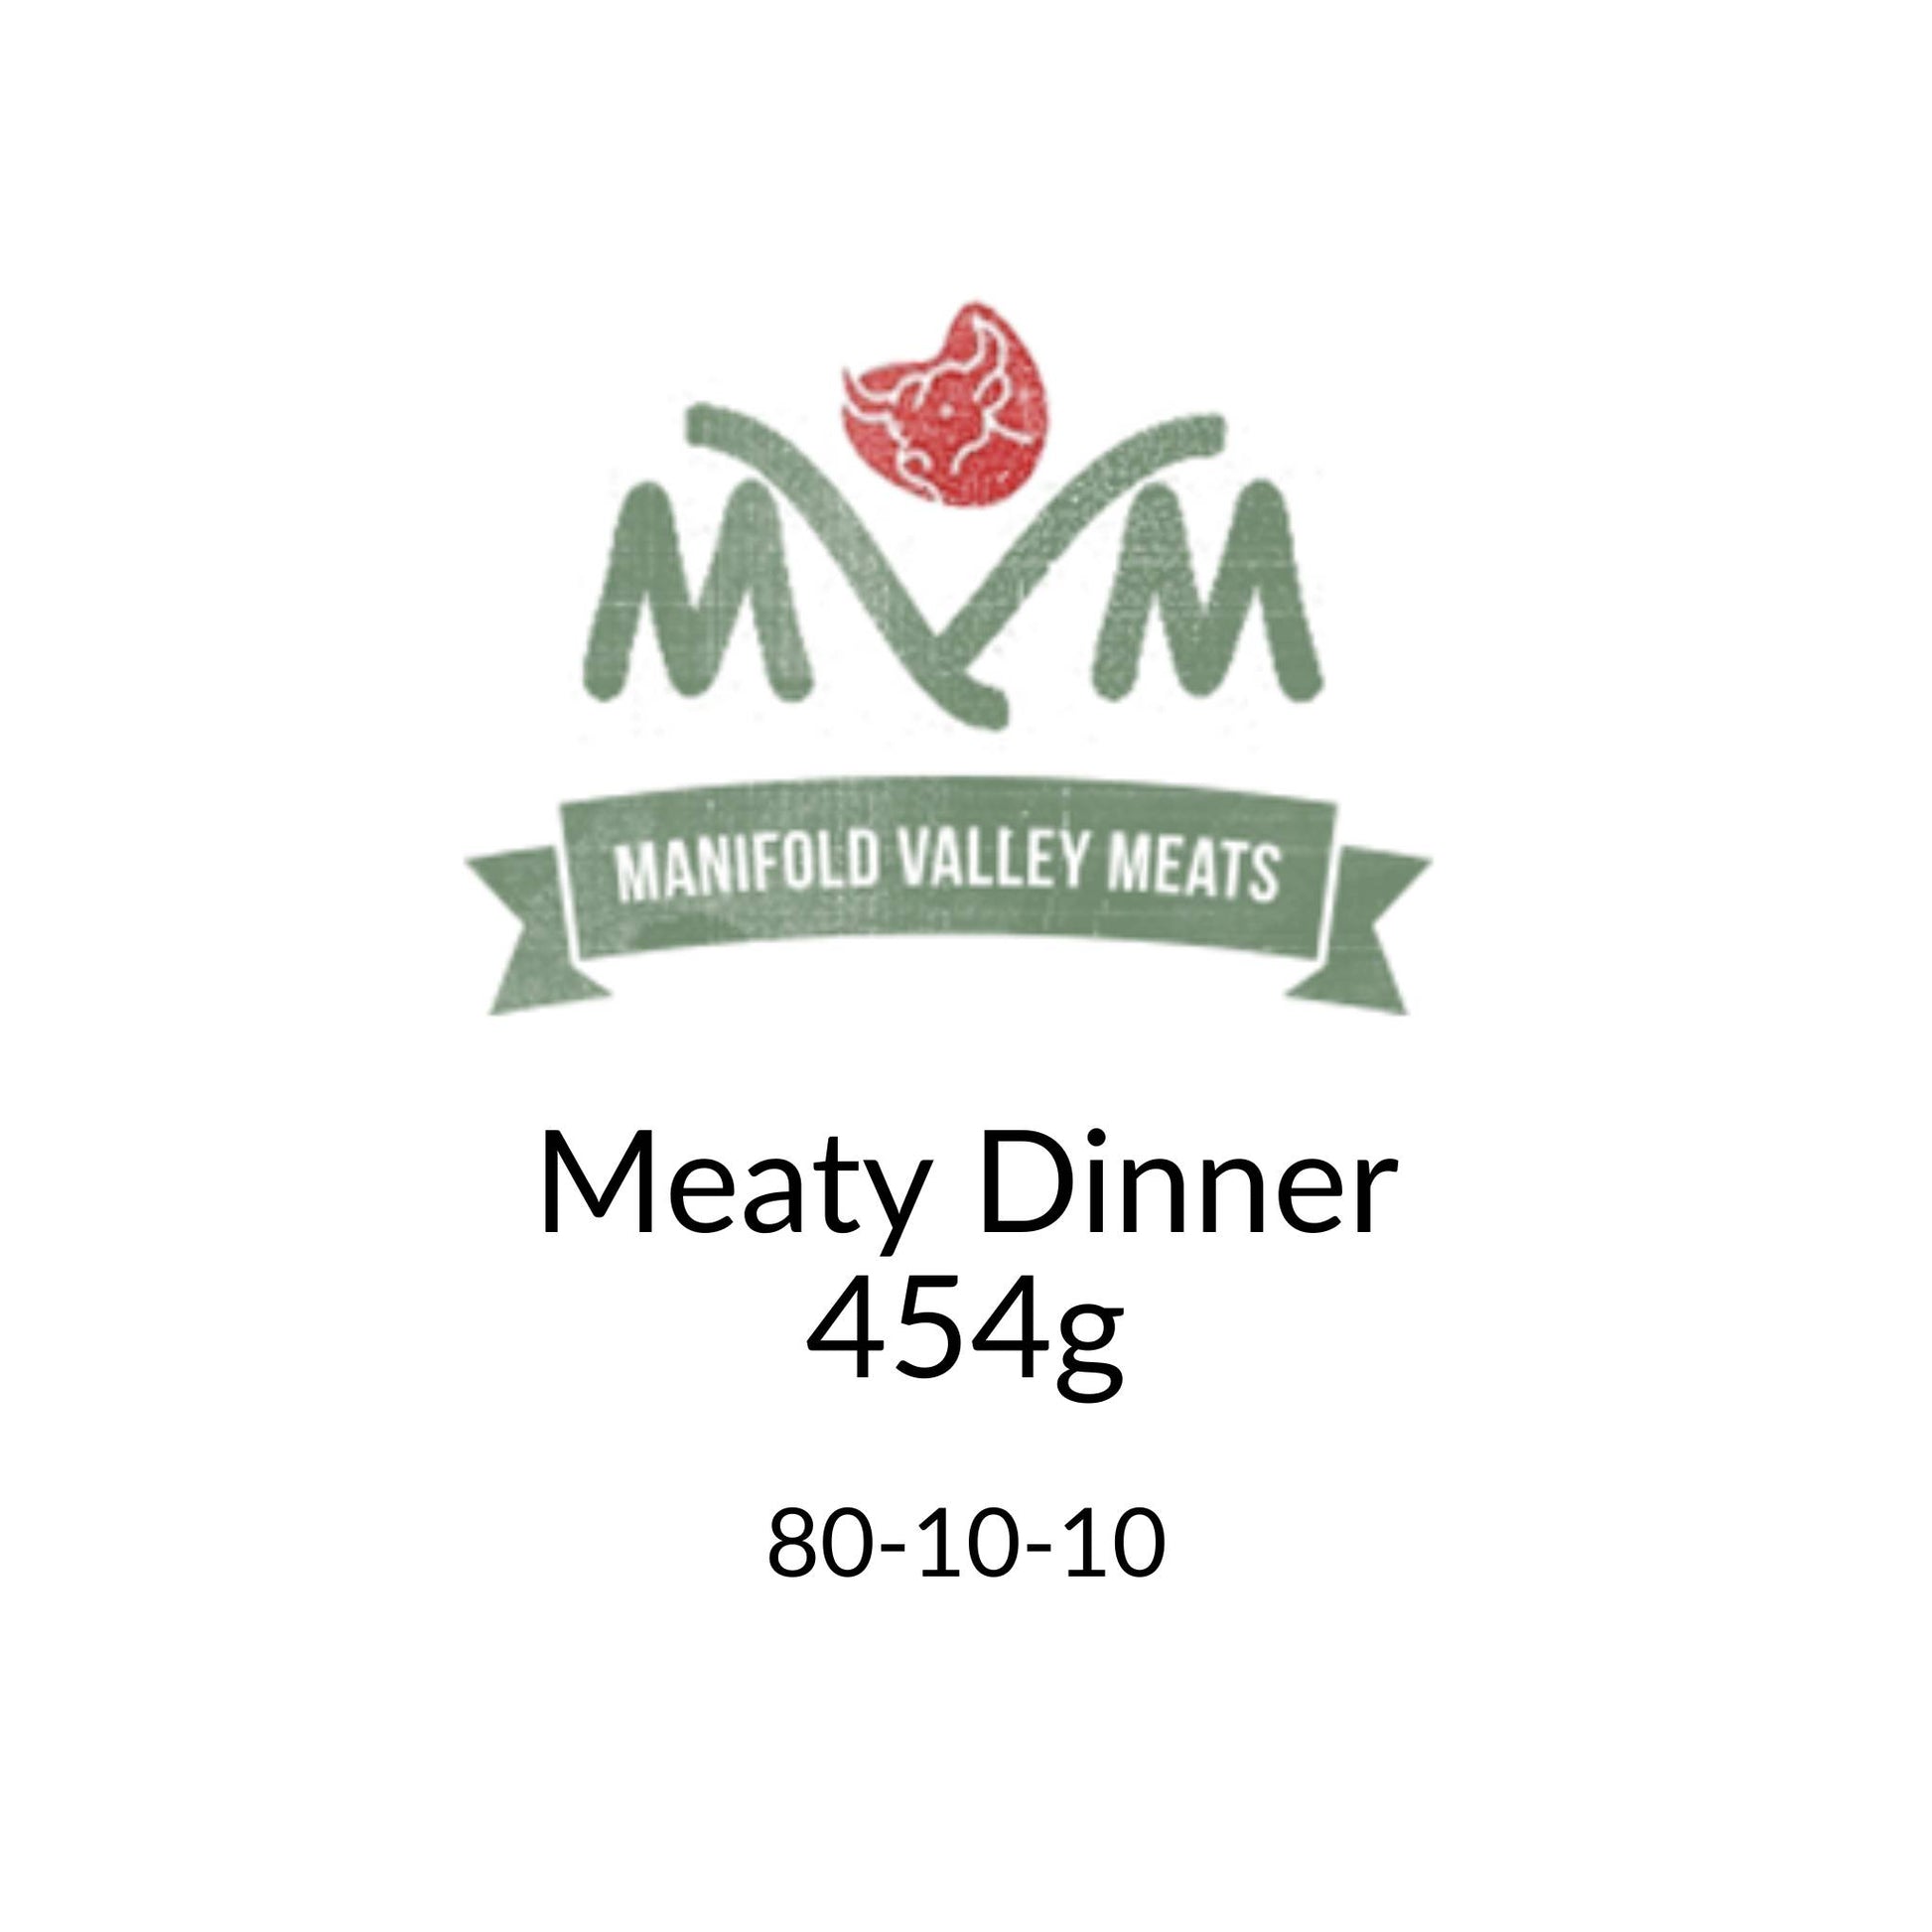 Manifold Valley Meats Meaty Dinner Raw Dog Food